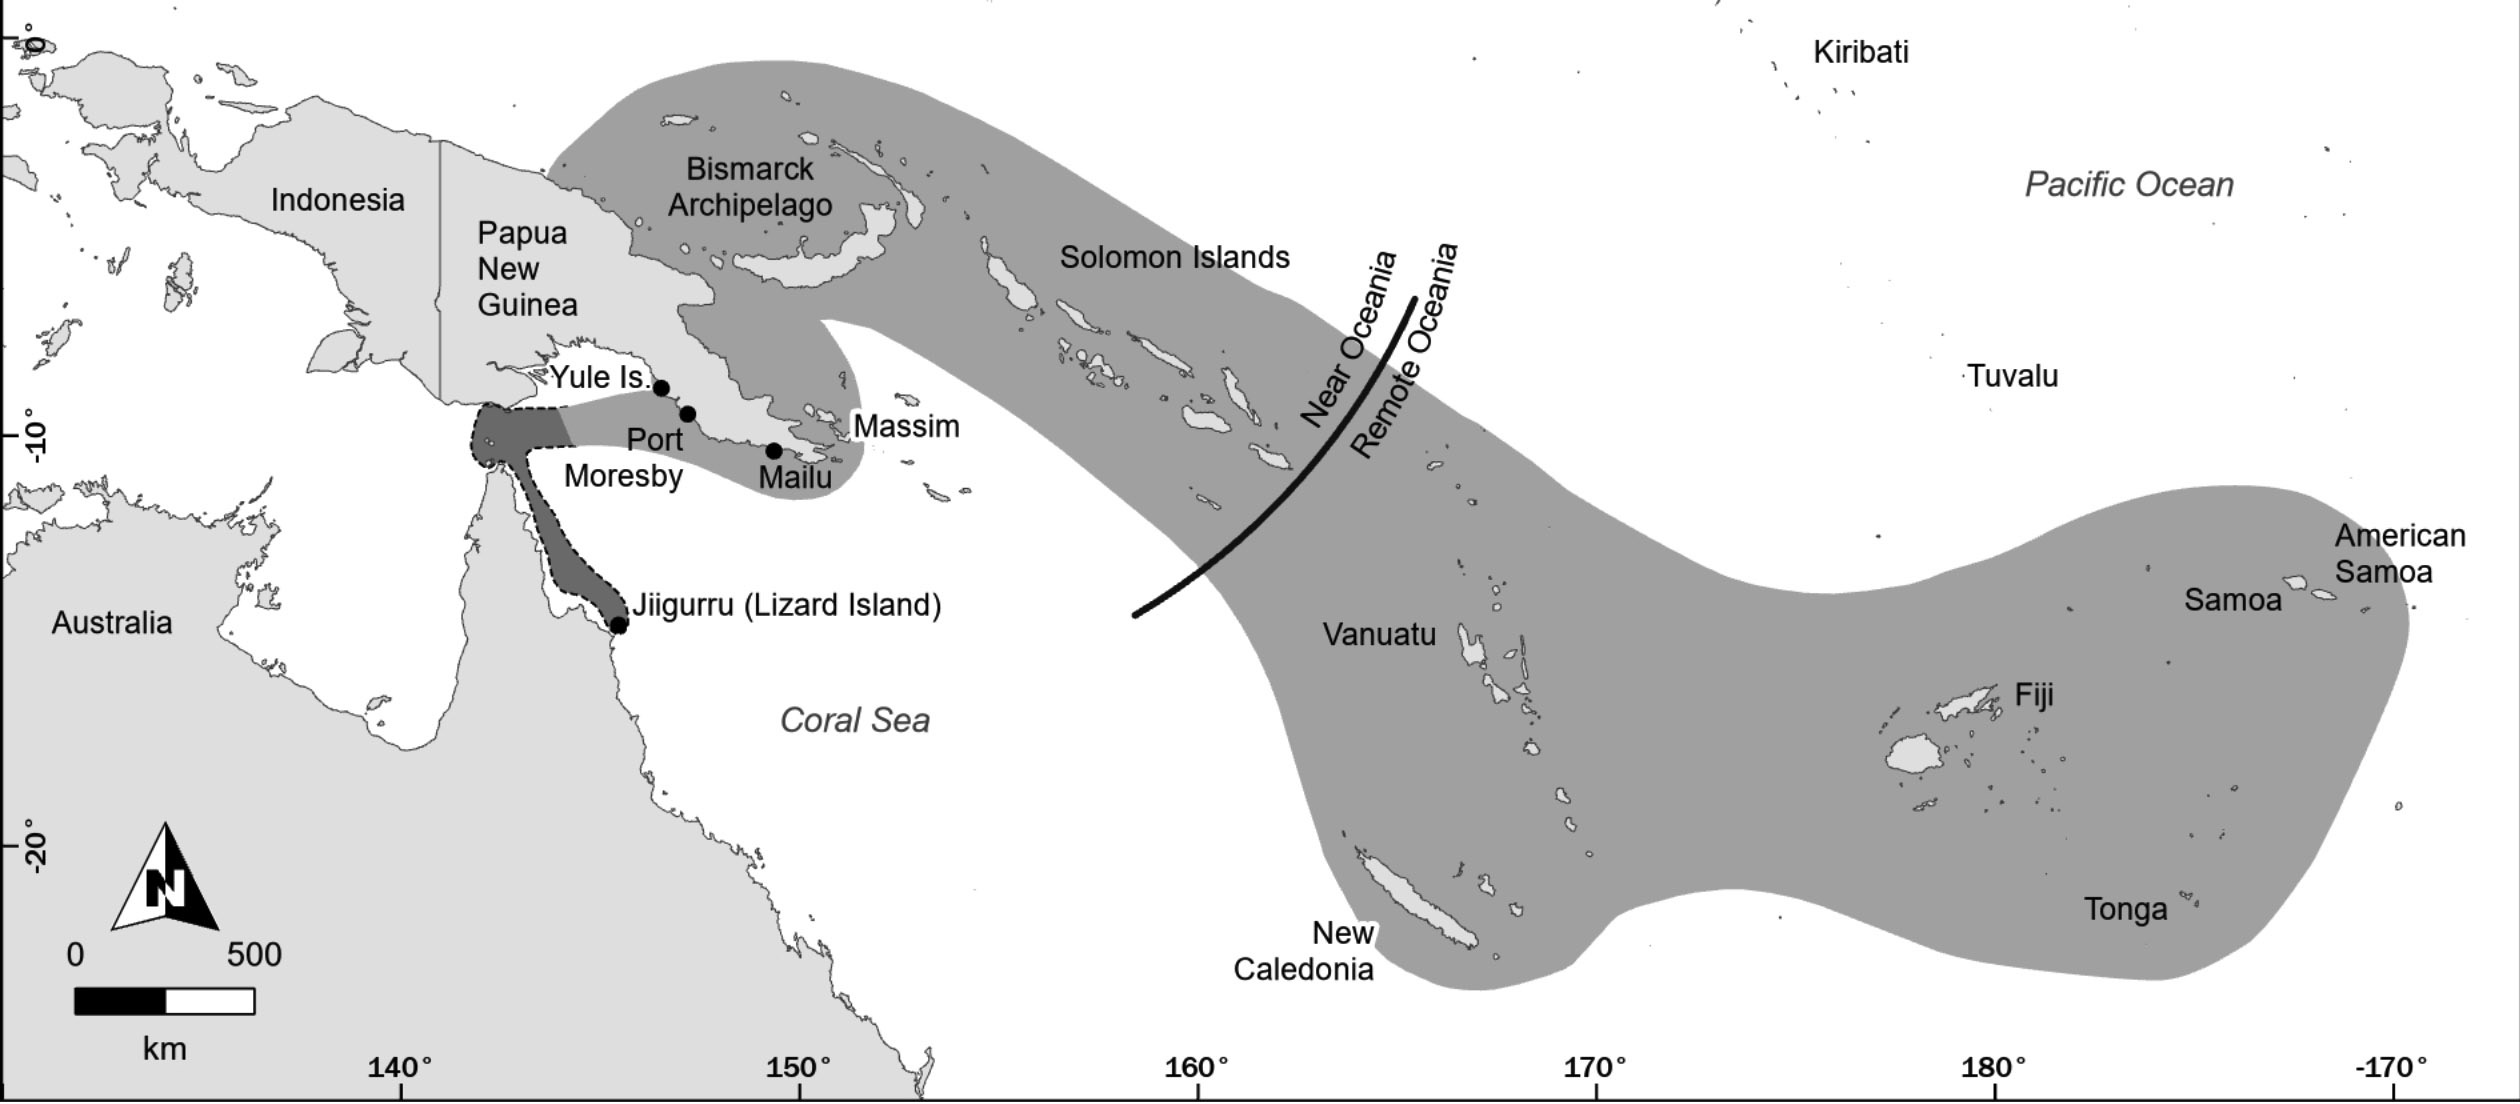 A map of the pacific, including PNG and Australia with highlighted regions across many islands.  